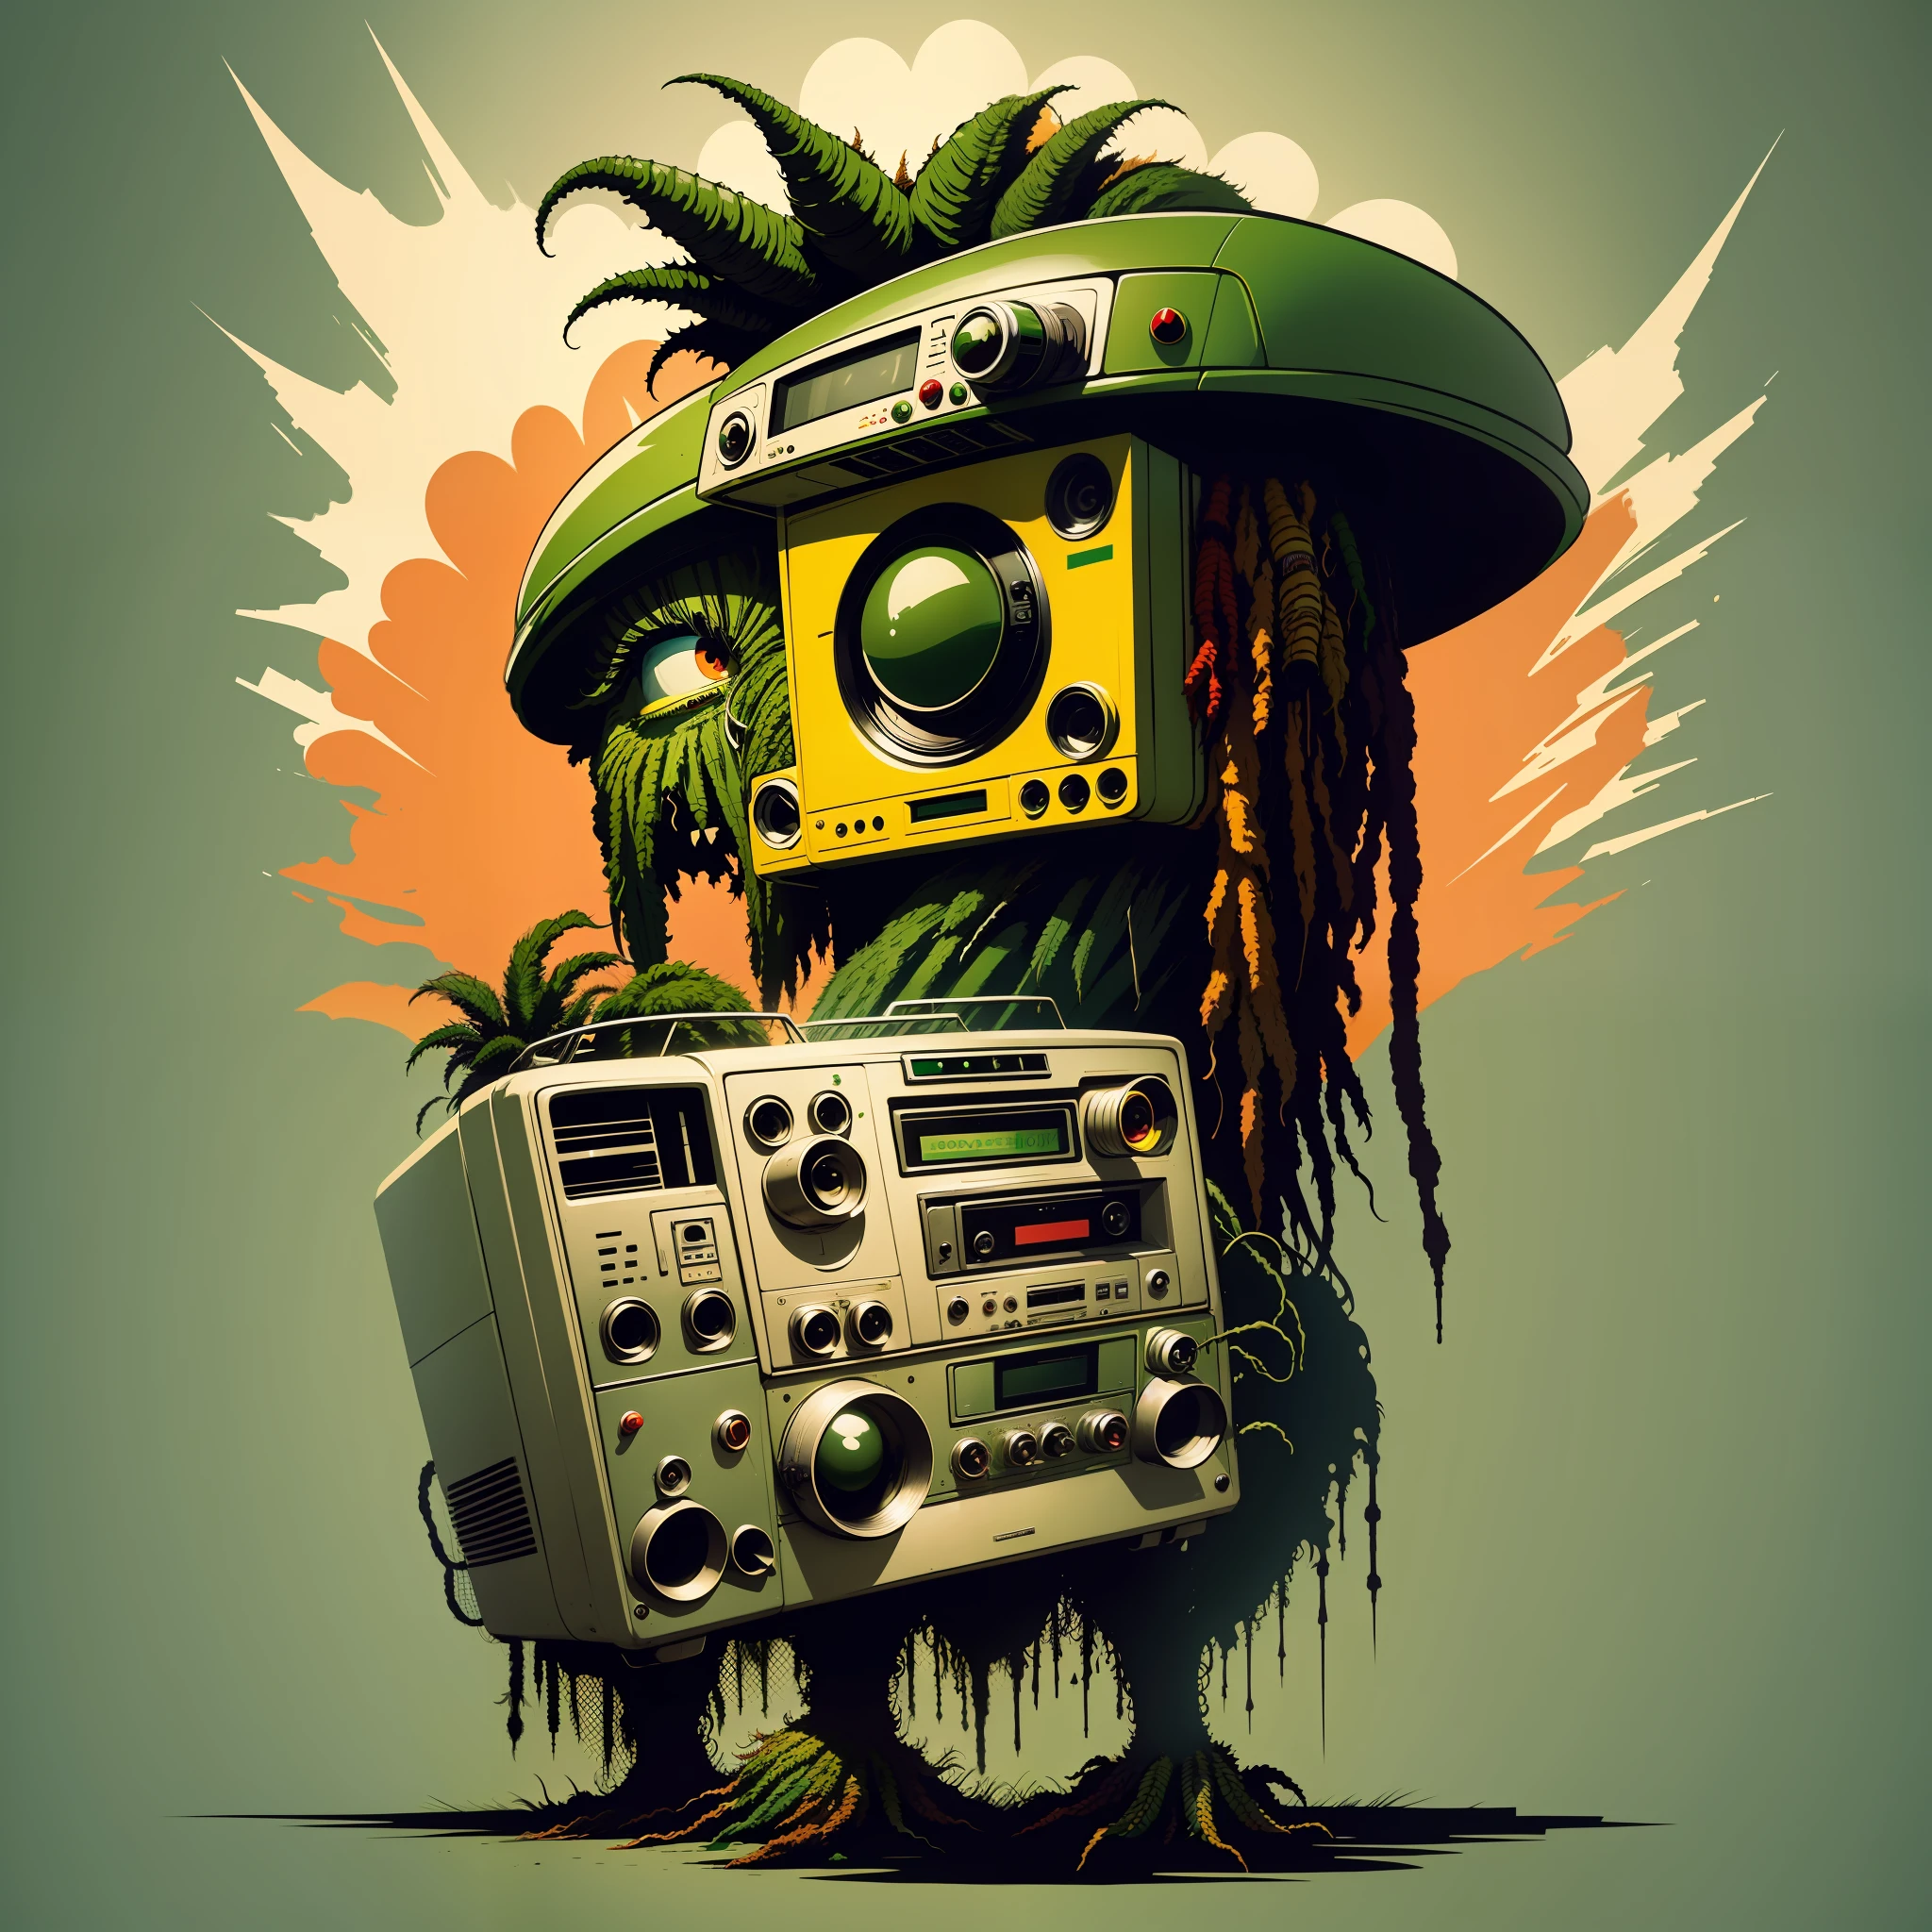 a ((((([rasta monster])))))), ( full body shot) holding a boombox, ghetto blaster, big ghetto blaster, tape deck, lofi hip hop, audio equipments, cassette, retro technology, nostalgic vibes, 1 9 6 0 s tech, radios, vintage, the 6 0 s, propaganda Poster style, Poster design, poster art style. 1970s, 1950s, 1960s, Very colourful poster, colour art, thirds rule, inspiring, 1970, lofi hip hop, high quality artwork, artwork, poster art style, promotional artwork, hiphop, 1 9 th, print, high quality wallpaper, poster artwork, style of shepherd fairey, in a retro or vintage style, reminiscent of classic advertisements or posters. Use warm and muted colors, capturing the nostalgic feel of vintage artwork, bird's eye view